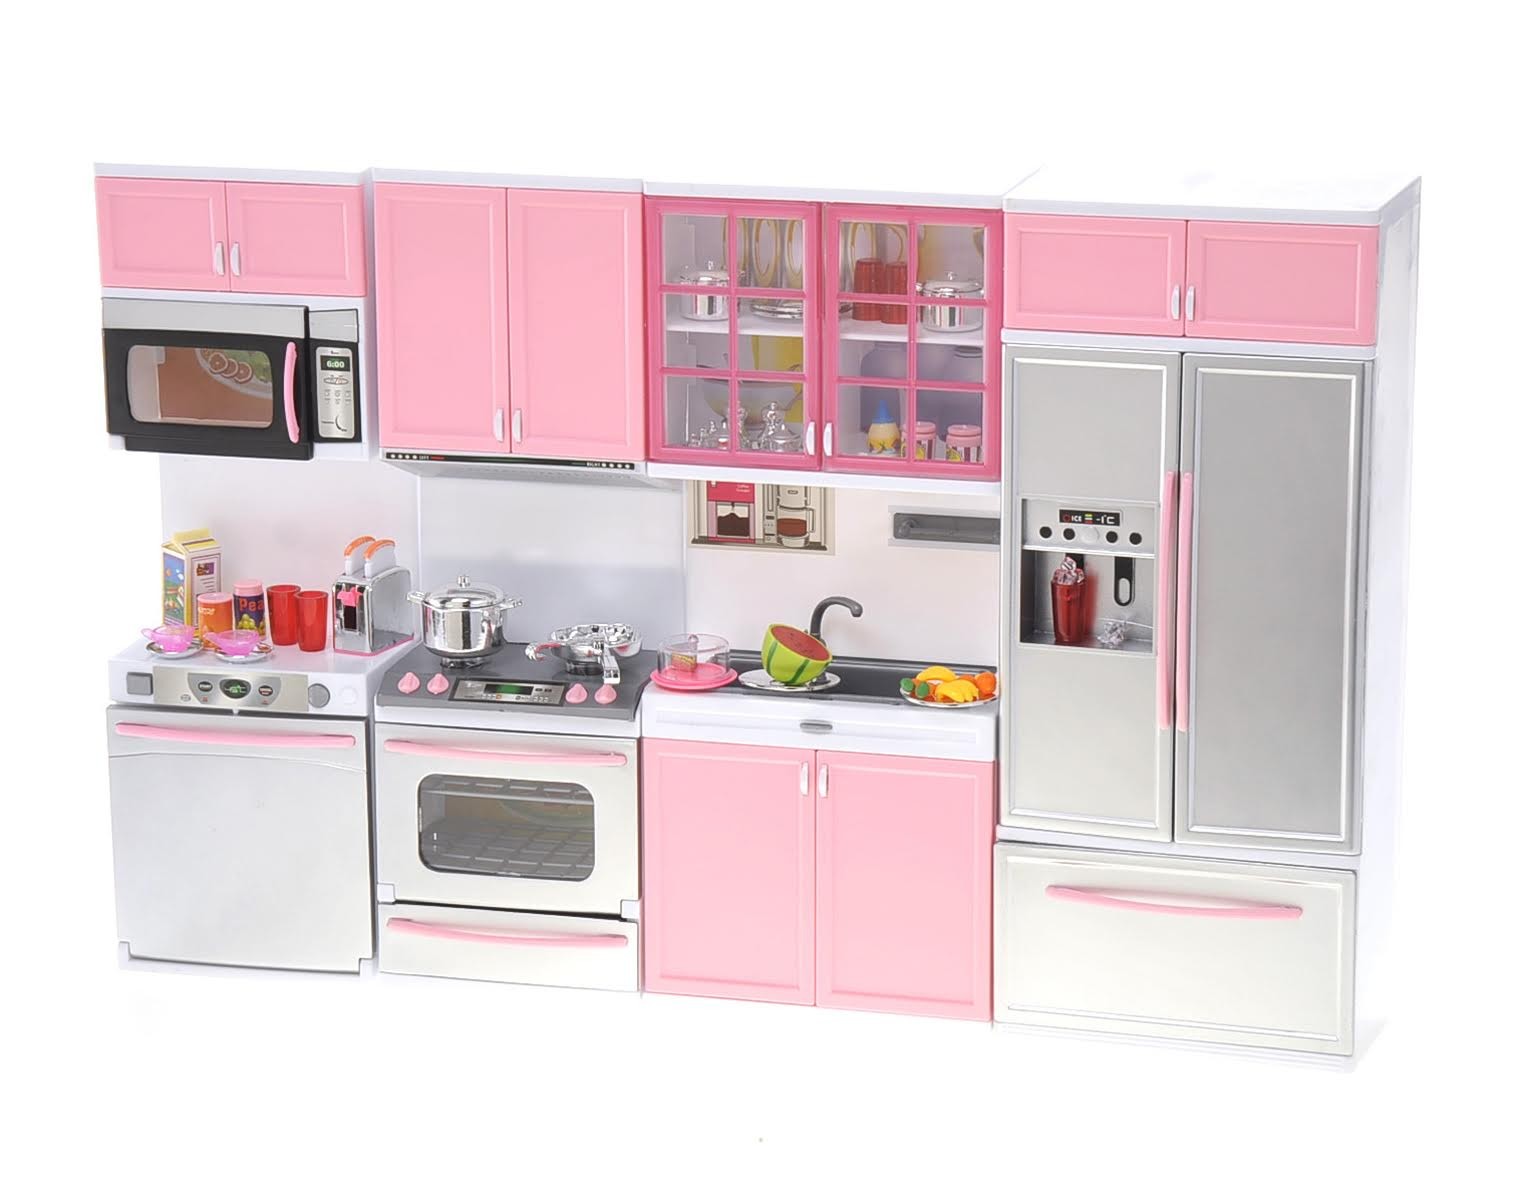 Battery Operated Modern Kitchen Playset w/ Dishwasher and Microwave